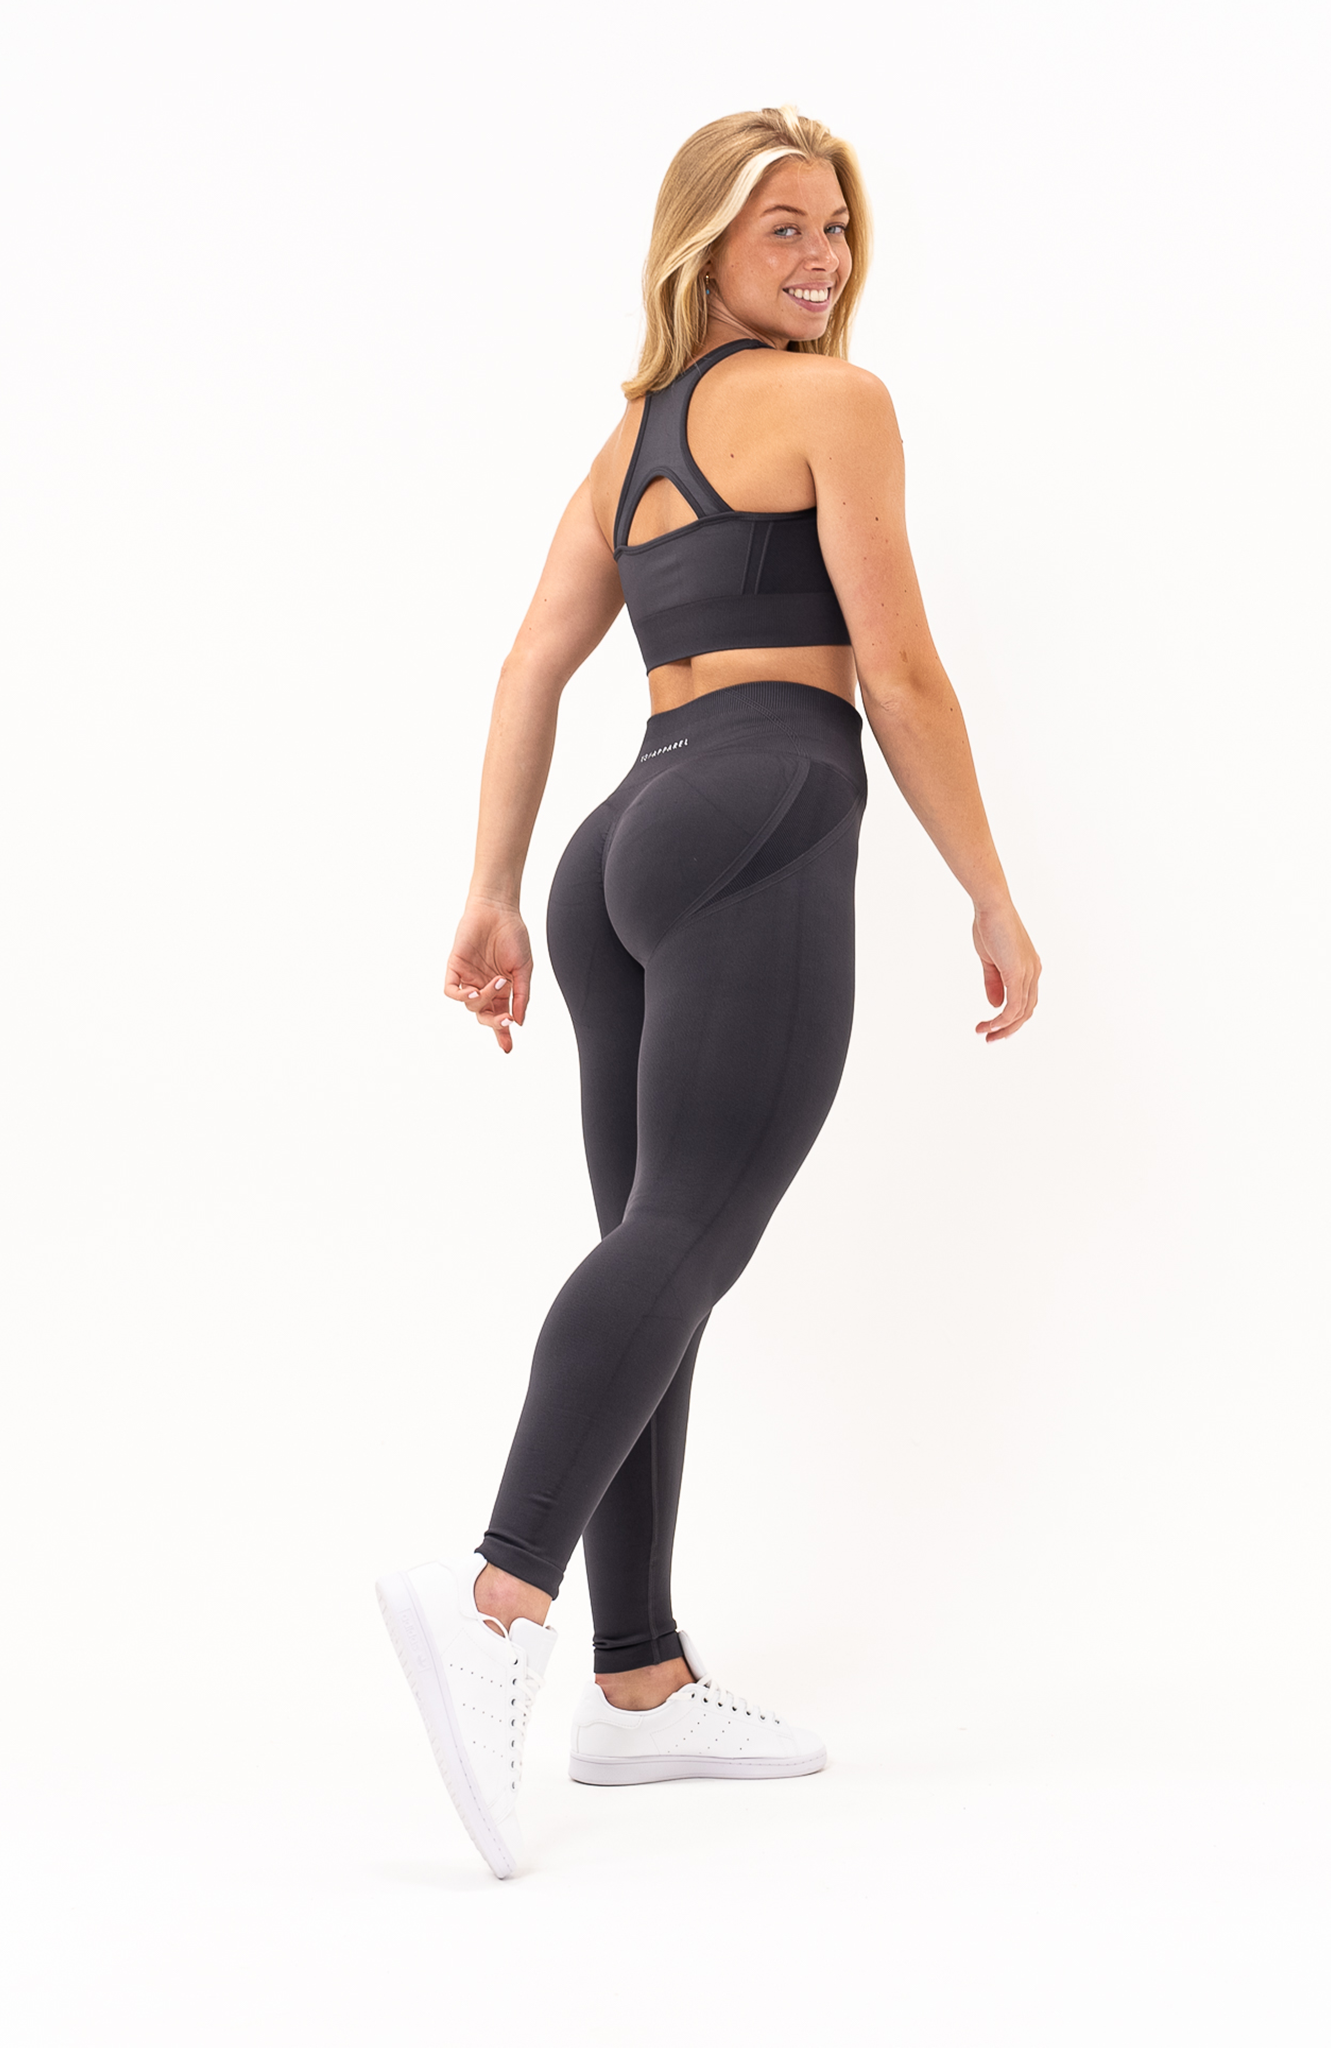 Women's Fashionable Sports Bra And Leggings Set And Bare Sensation Tights  Set for Women